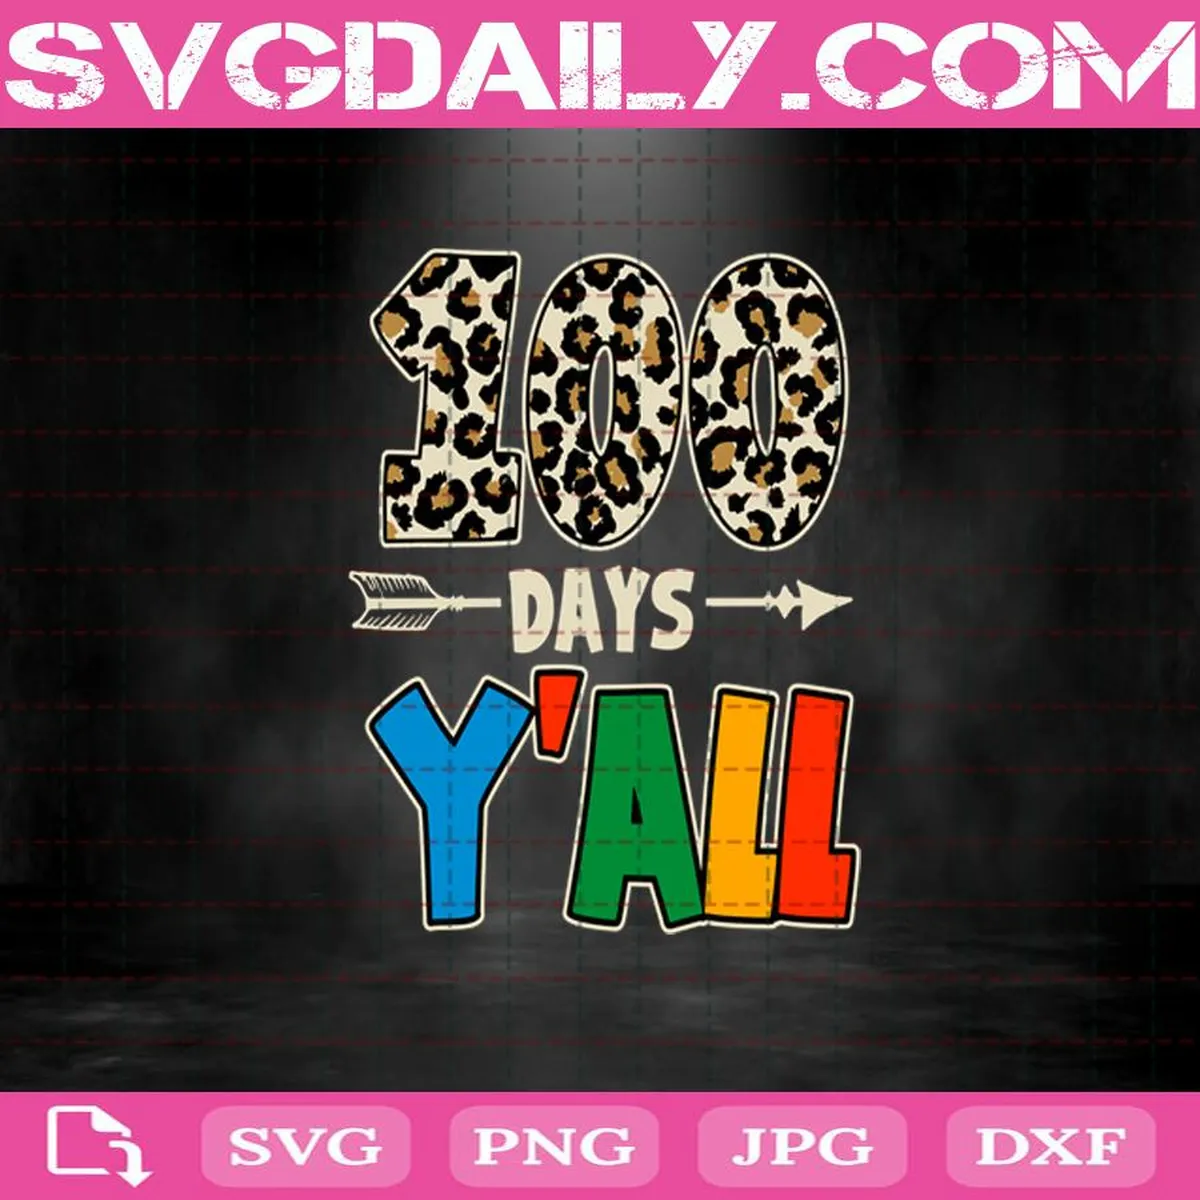 100 Days Y'all Teacher Student Svg, 100th Day Of School Svg, 100 Days Y'all Leopard Svg, 100 Days Y'all Svg, School Svg